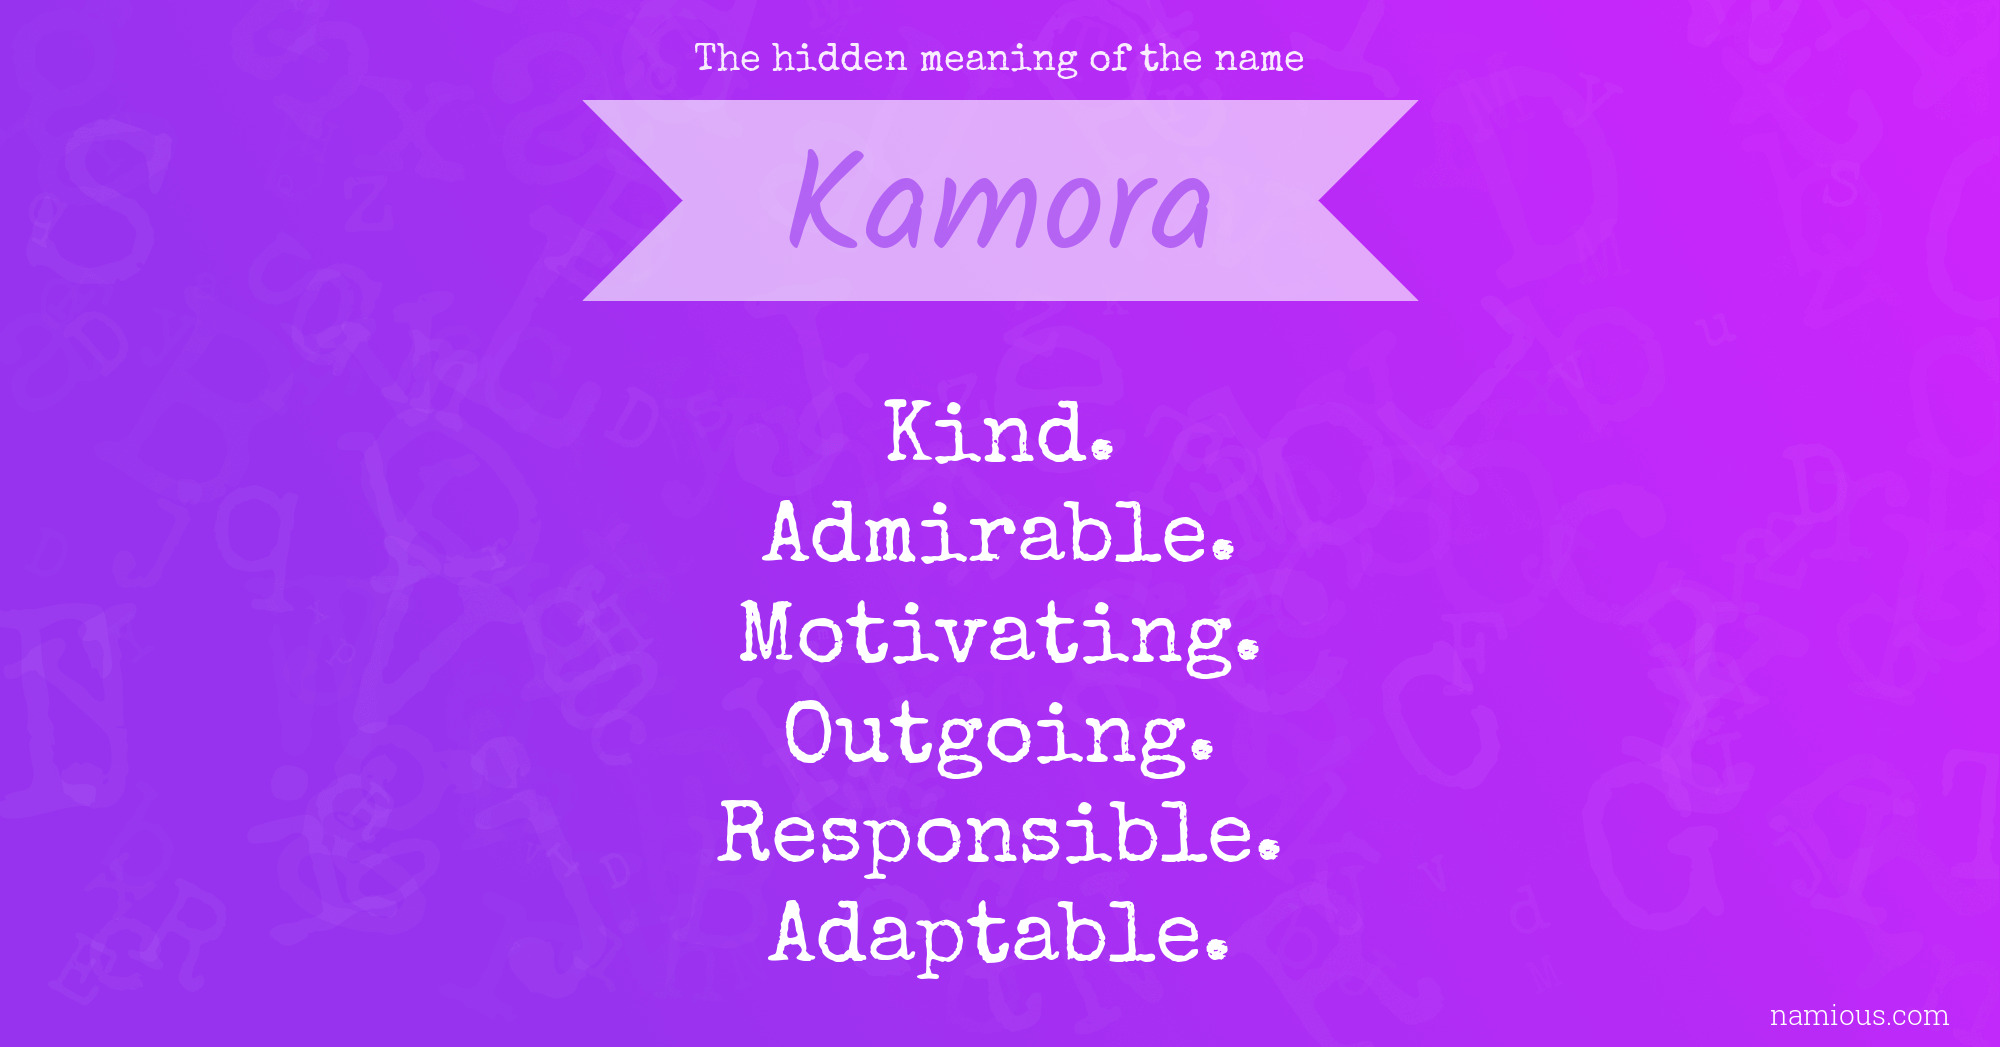 The hidden meaning of the name Kamora